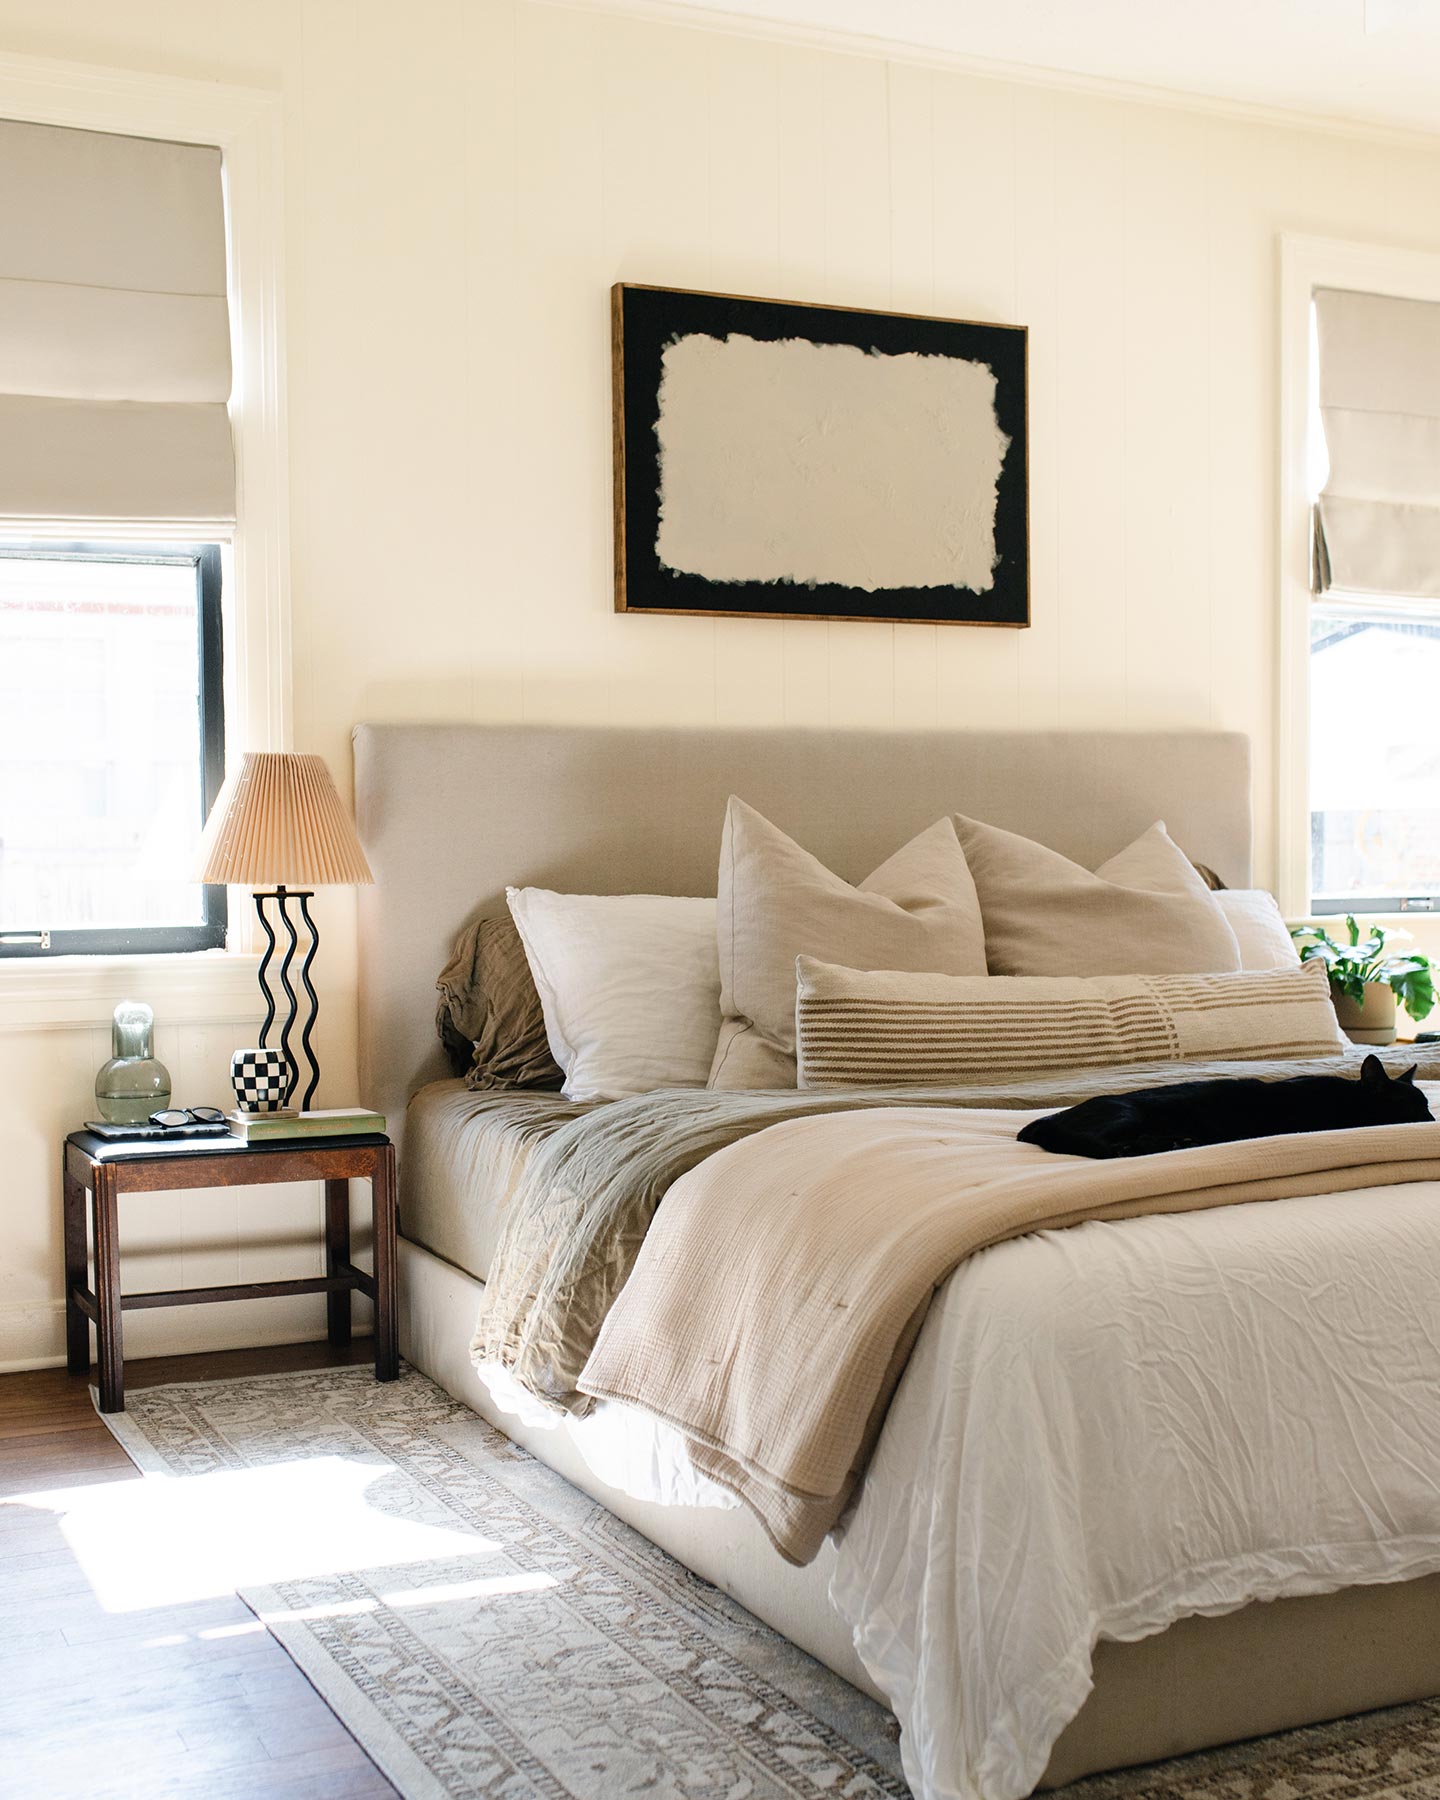 Neutrals, such as this this warm beige, Like Buttah, are great options for bedroom paint colors.